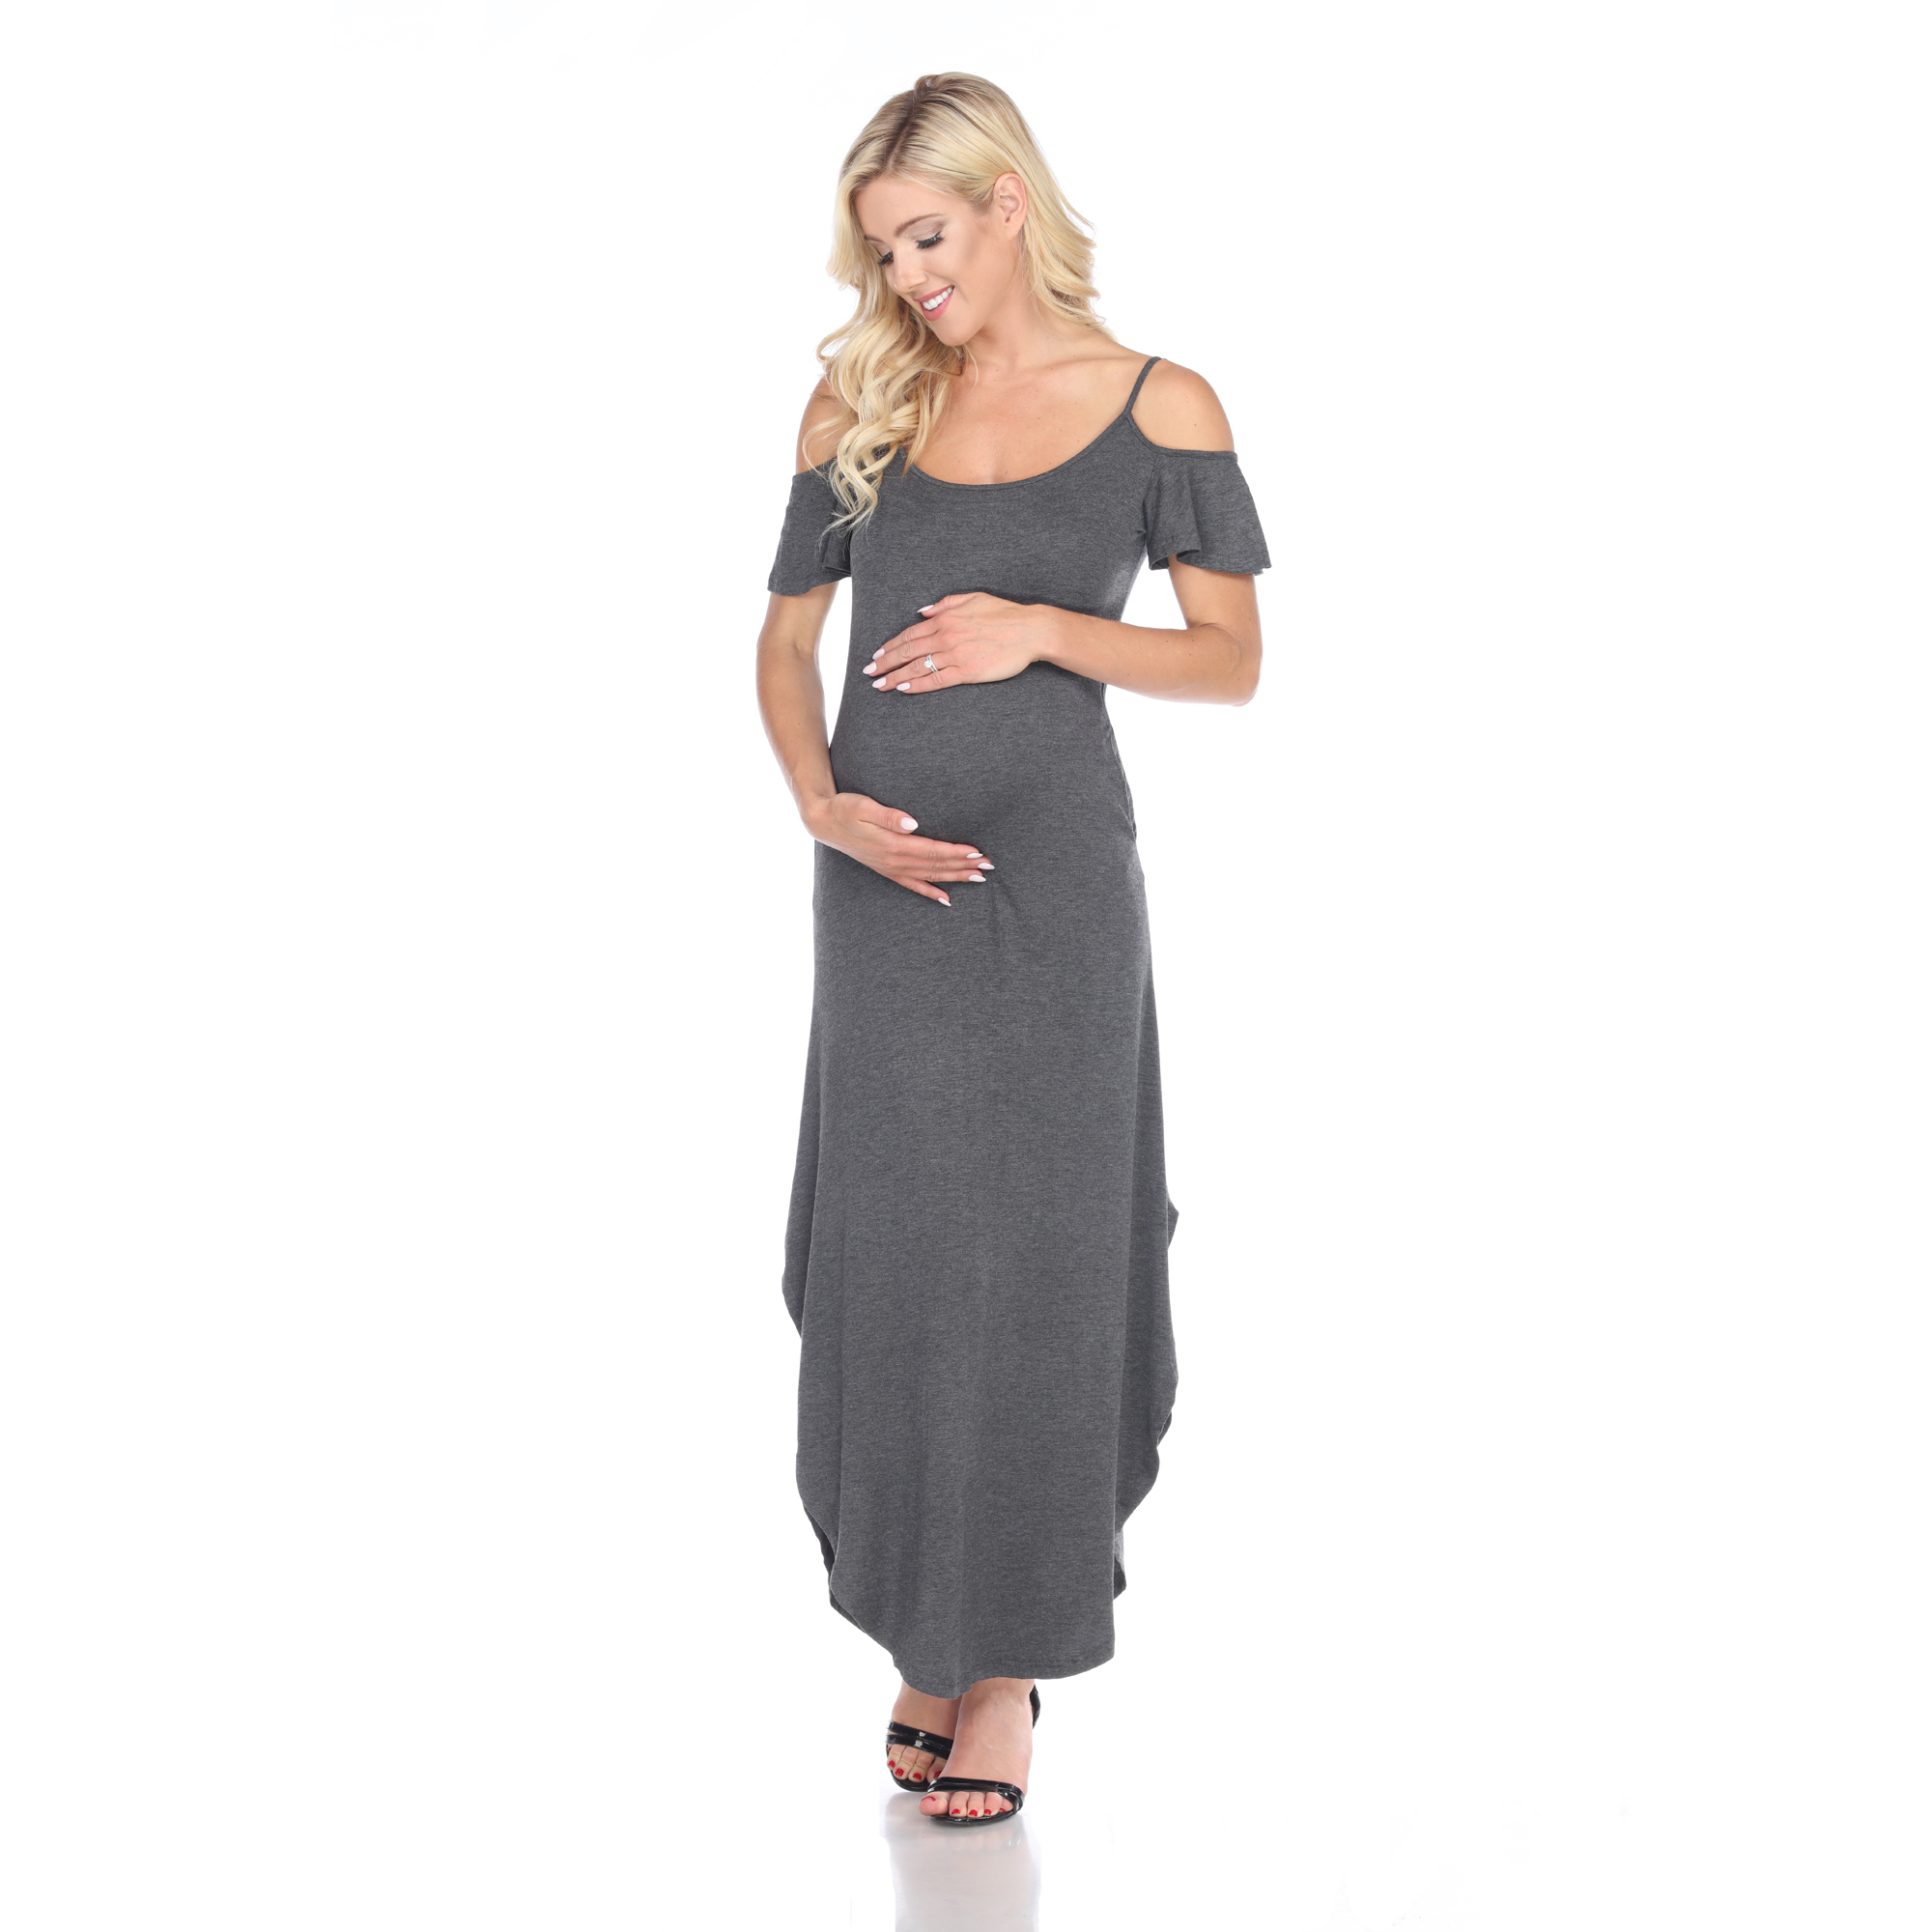 White Mark Women's Maternity Cold Shoulder Maxi Dress - Charcoal, 3X